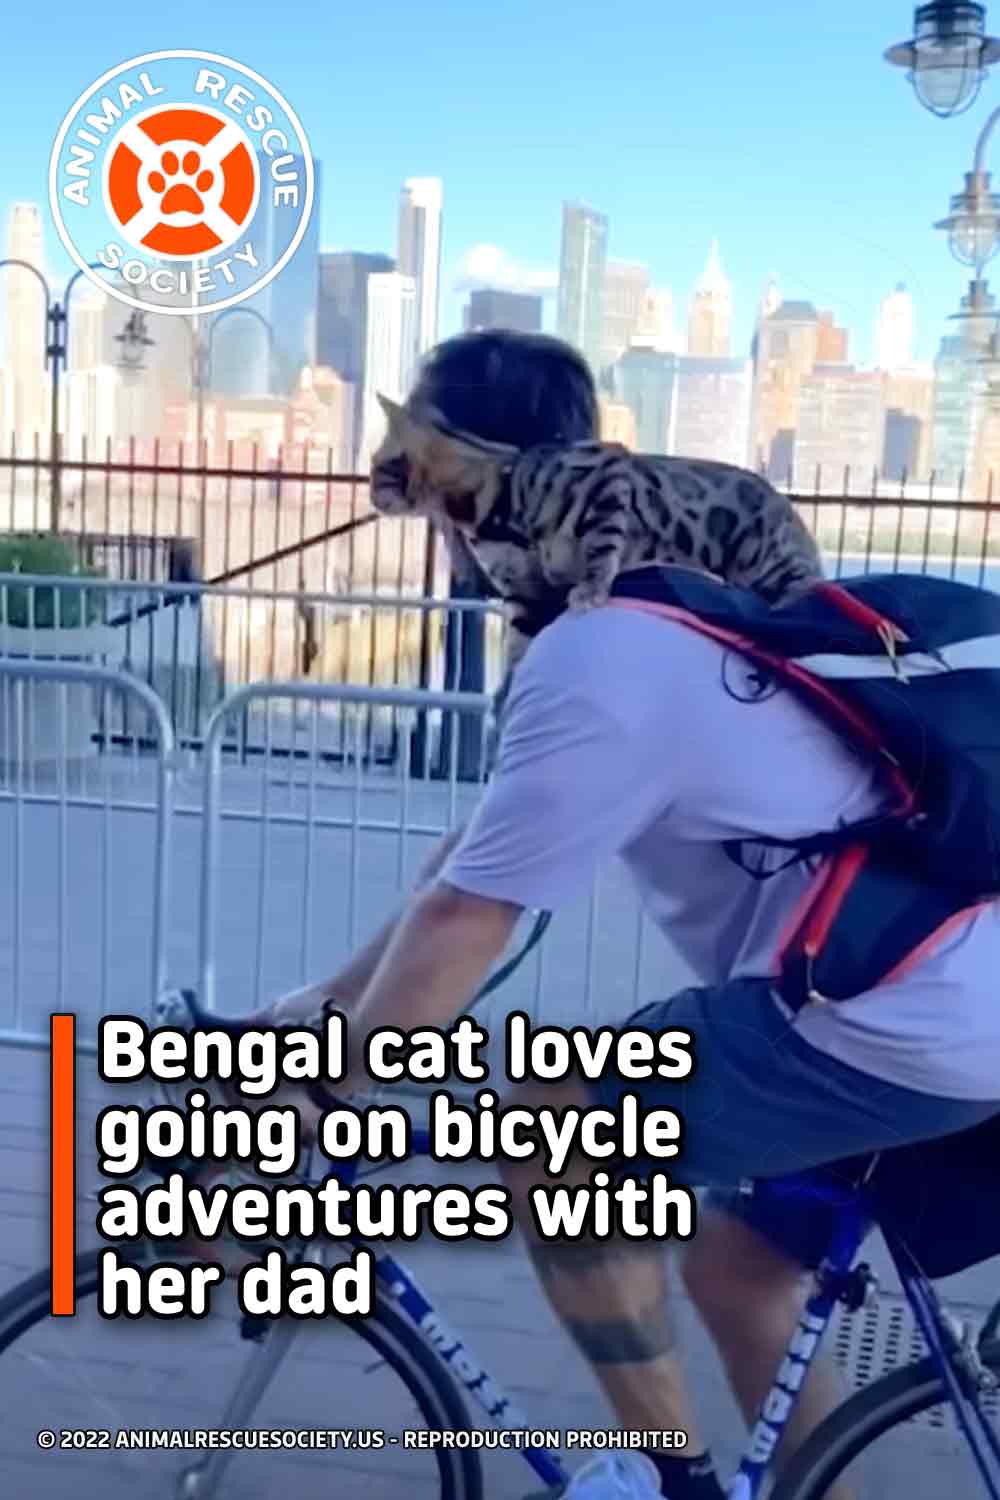 Bengal cat loves going on bicycle adventures with her dad